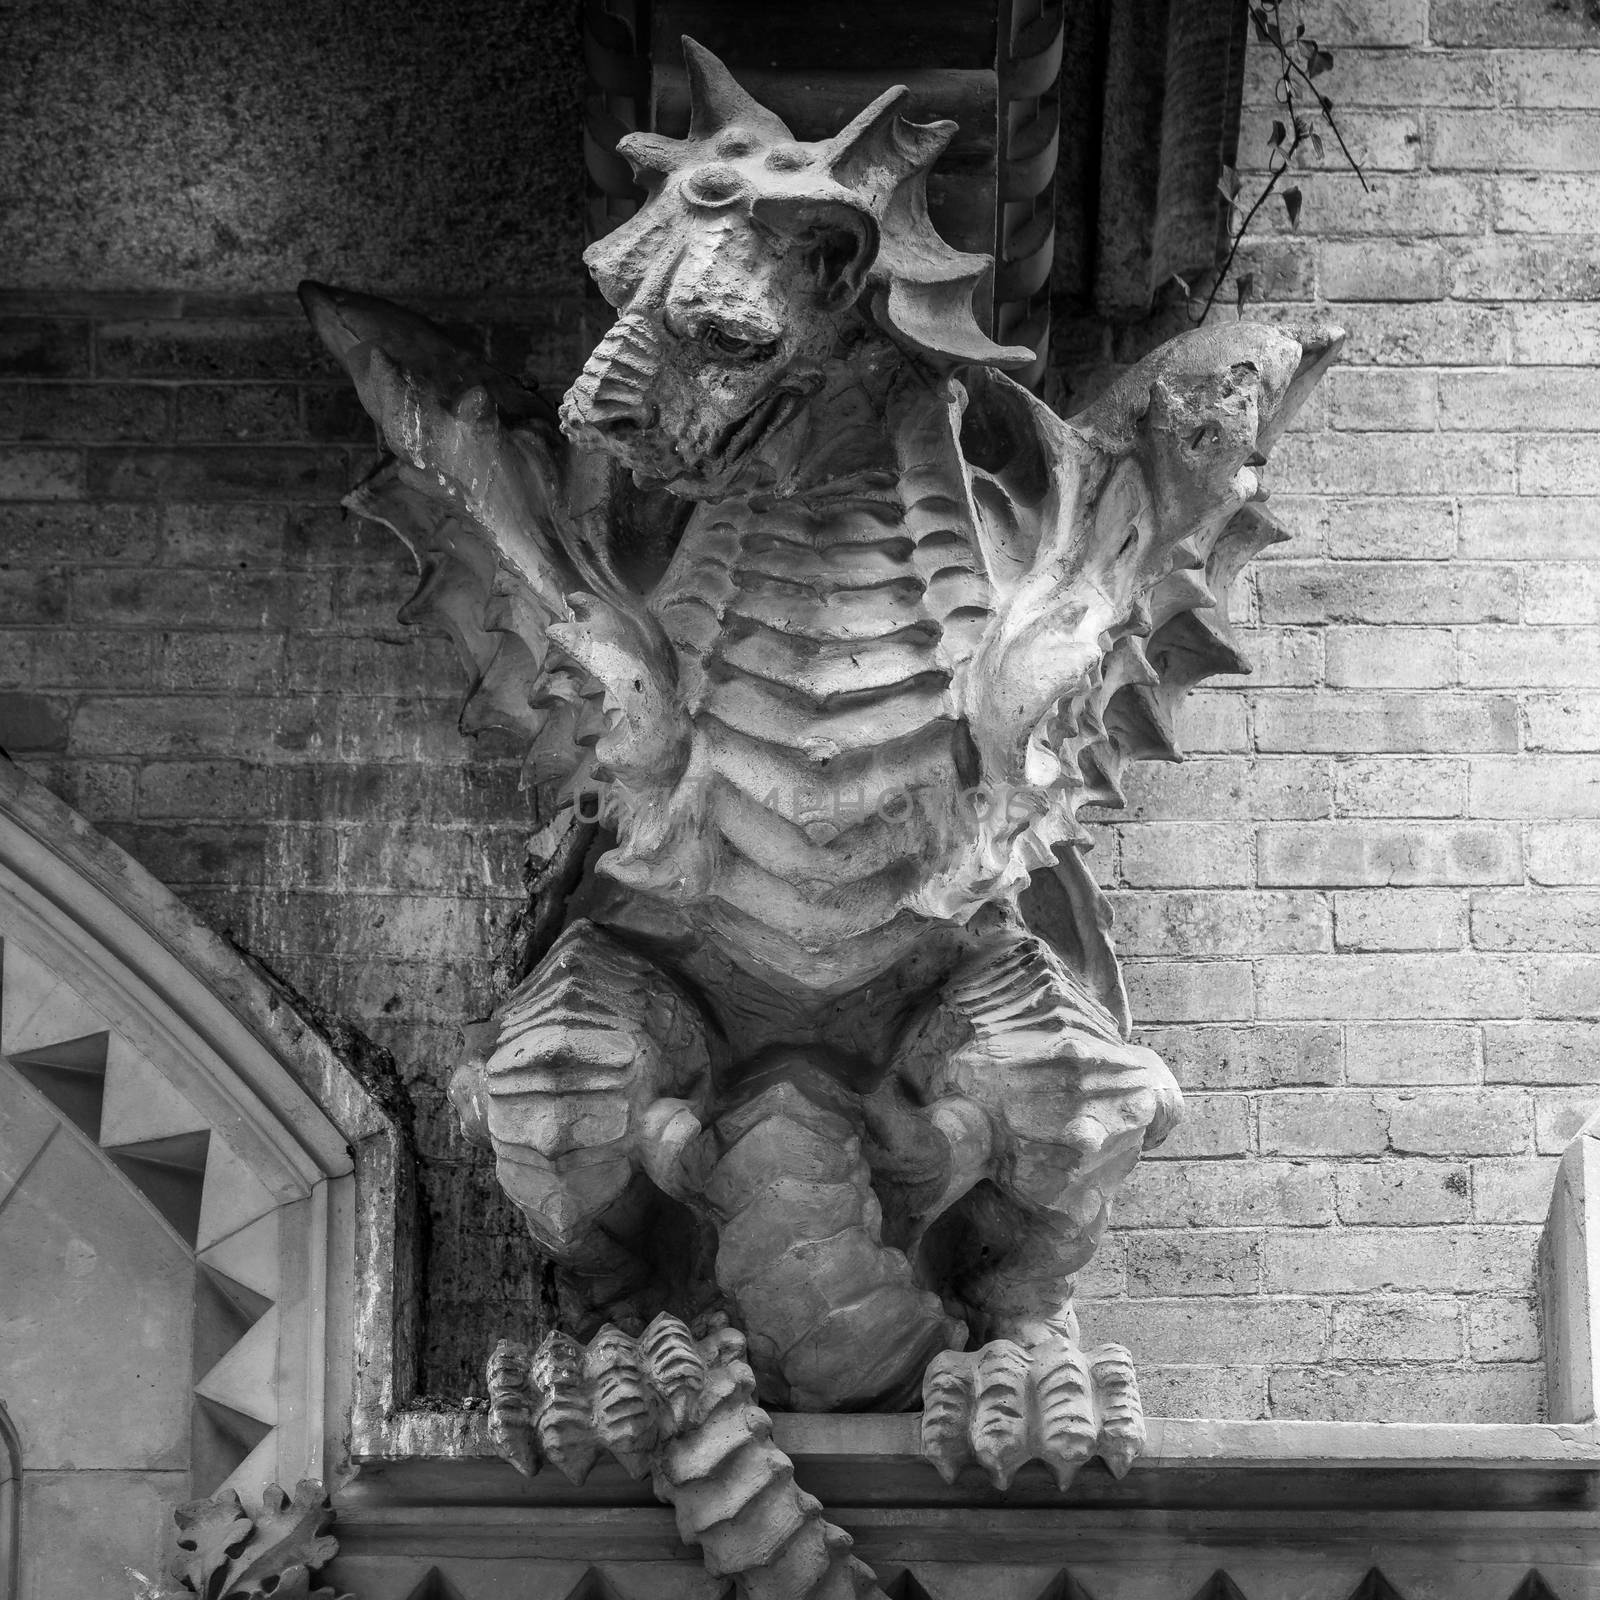 TURIN, ITALY - Dragon on Victory Palace facade  by Perseomedusa